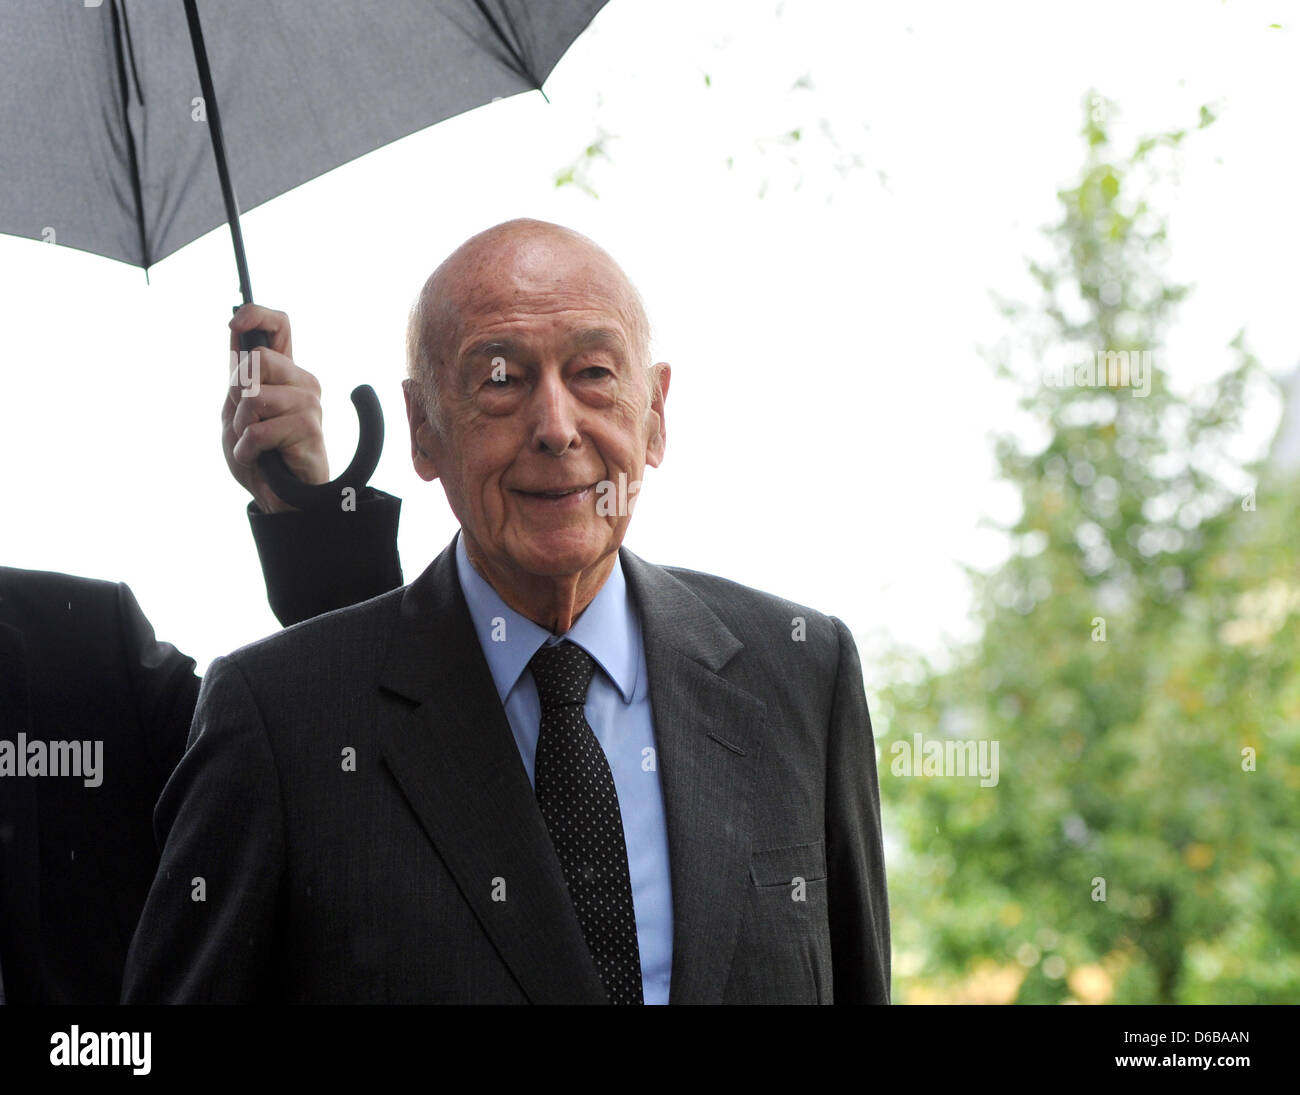 Former French President Valery Giscard d Estaing arrives at Bucerius Law School in Hamburg, Germany, 24 August 2012. Along with Former German Chancellor Helmut Schmidt, he took part in the graduation ceremony. Photo: ANGELIKA WARMUTH Stock Photo